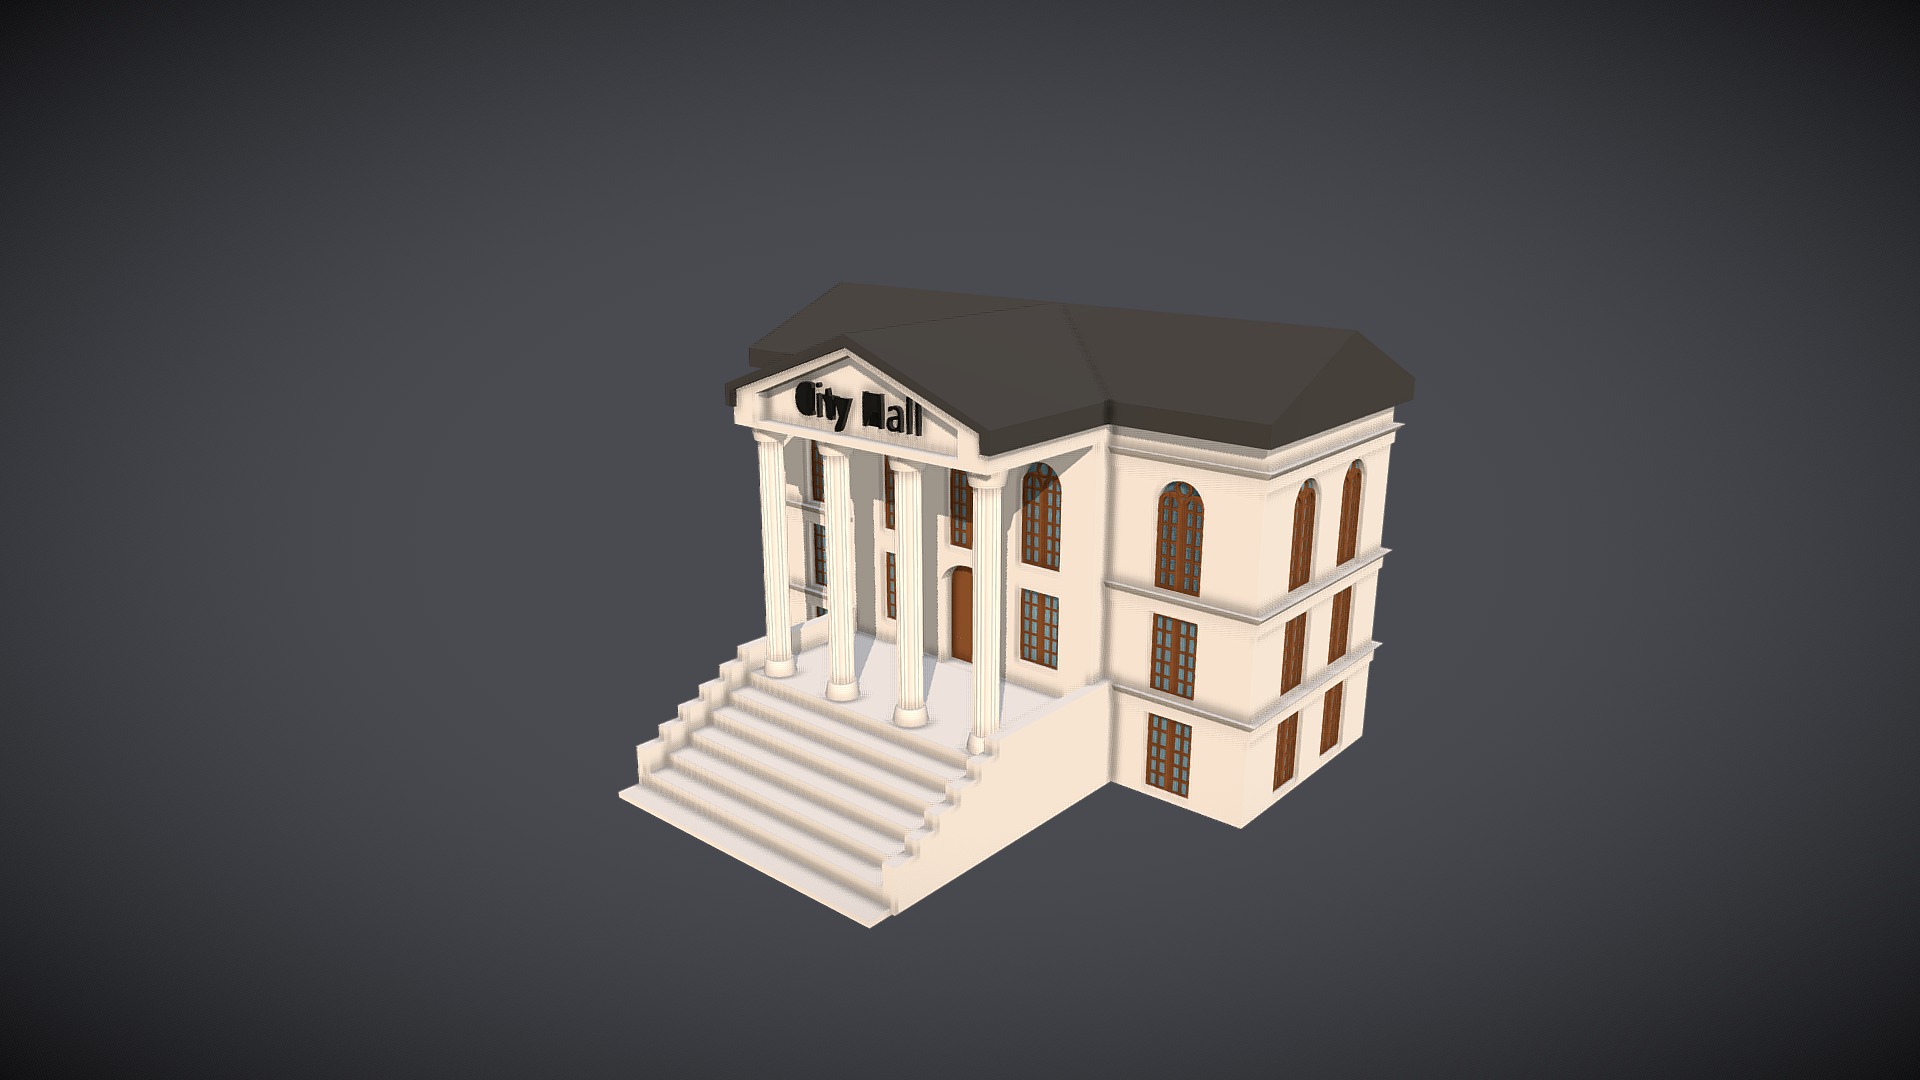 3D model Low-Poly City Hall - This is a 3D model of the Low-Poly City Hall. The 3D model is about a white house with a black background.